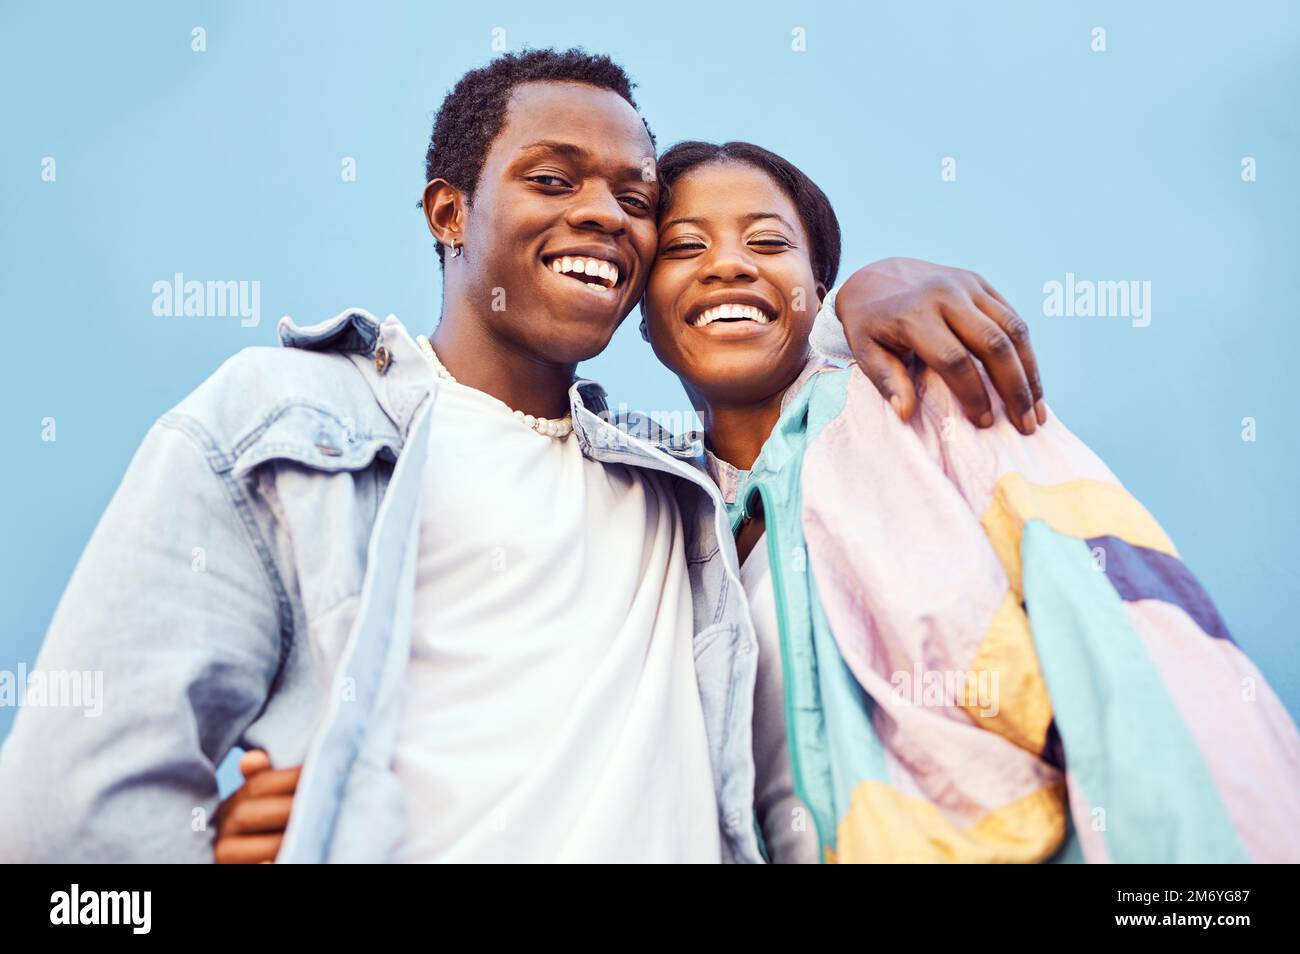 Couple, love or bonding hug by city wall background in trust, security or support in relax urban date, fun activity or holiday. Portrait, happy smile Stock Photo